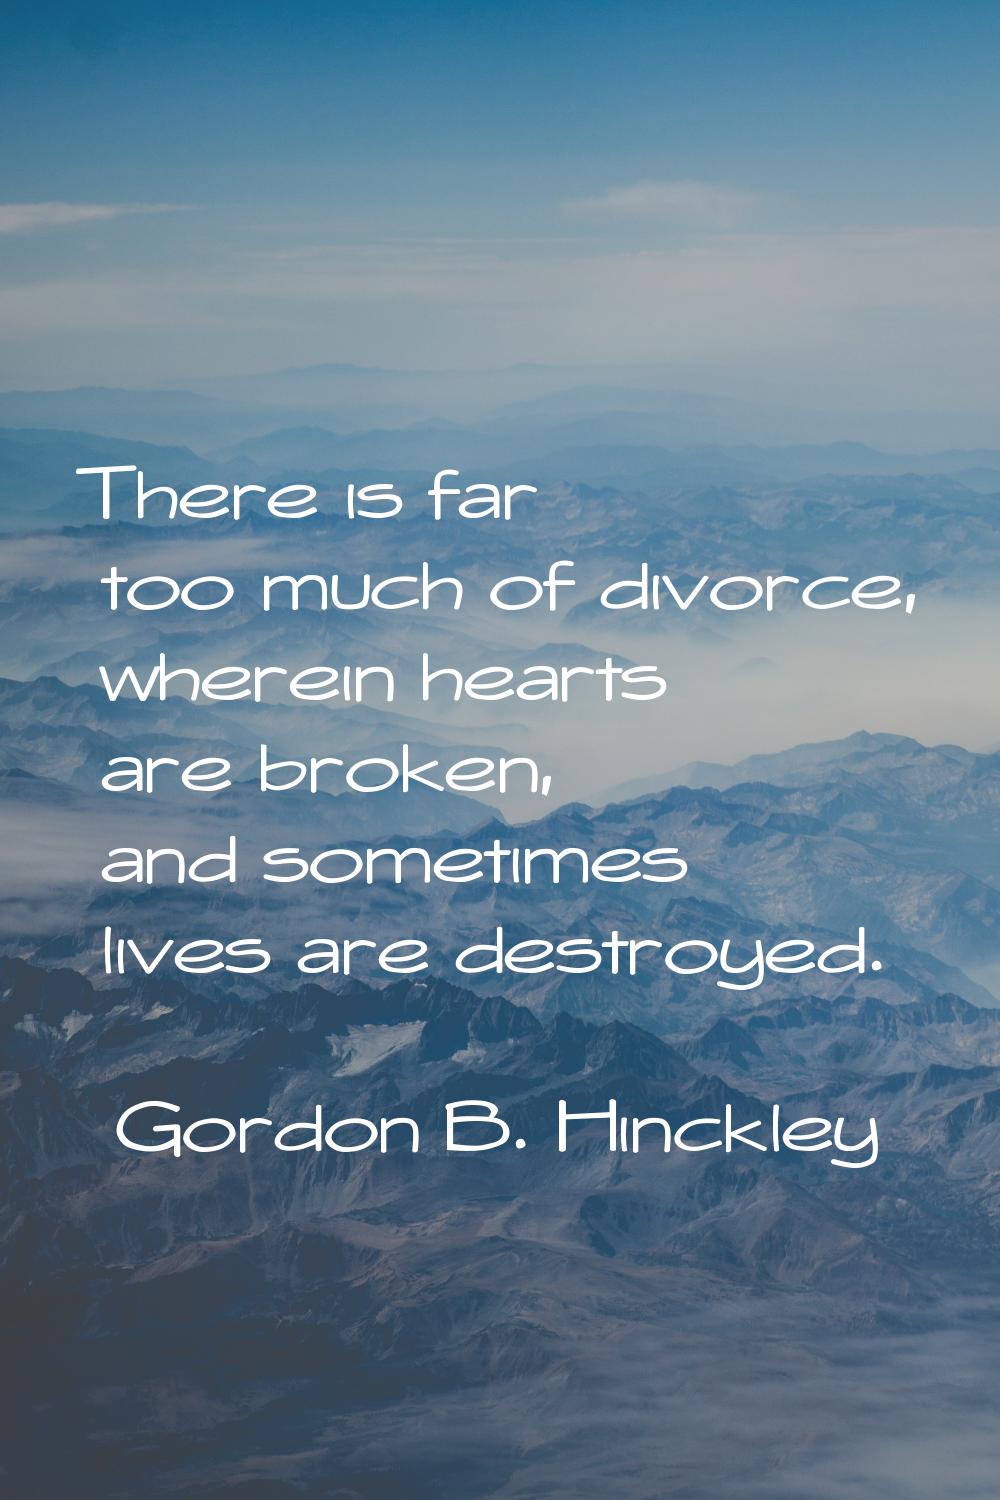 There is far too much of divorce, wherein hearts are broken, and sometimes lives are destroyed.